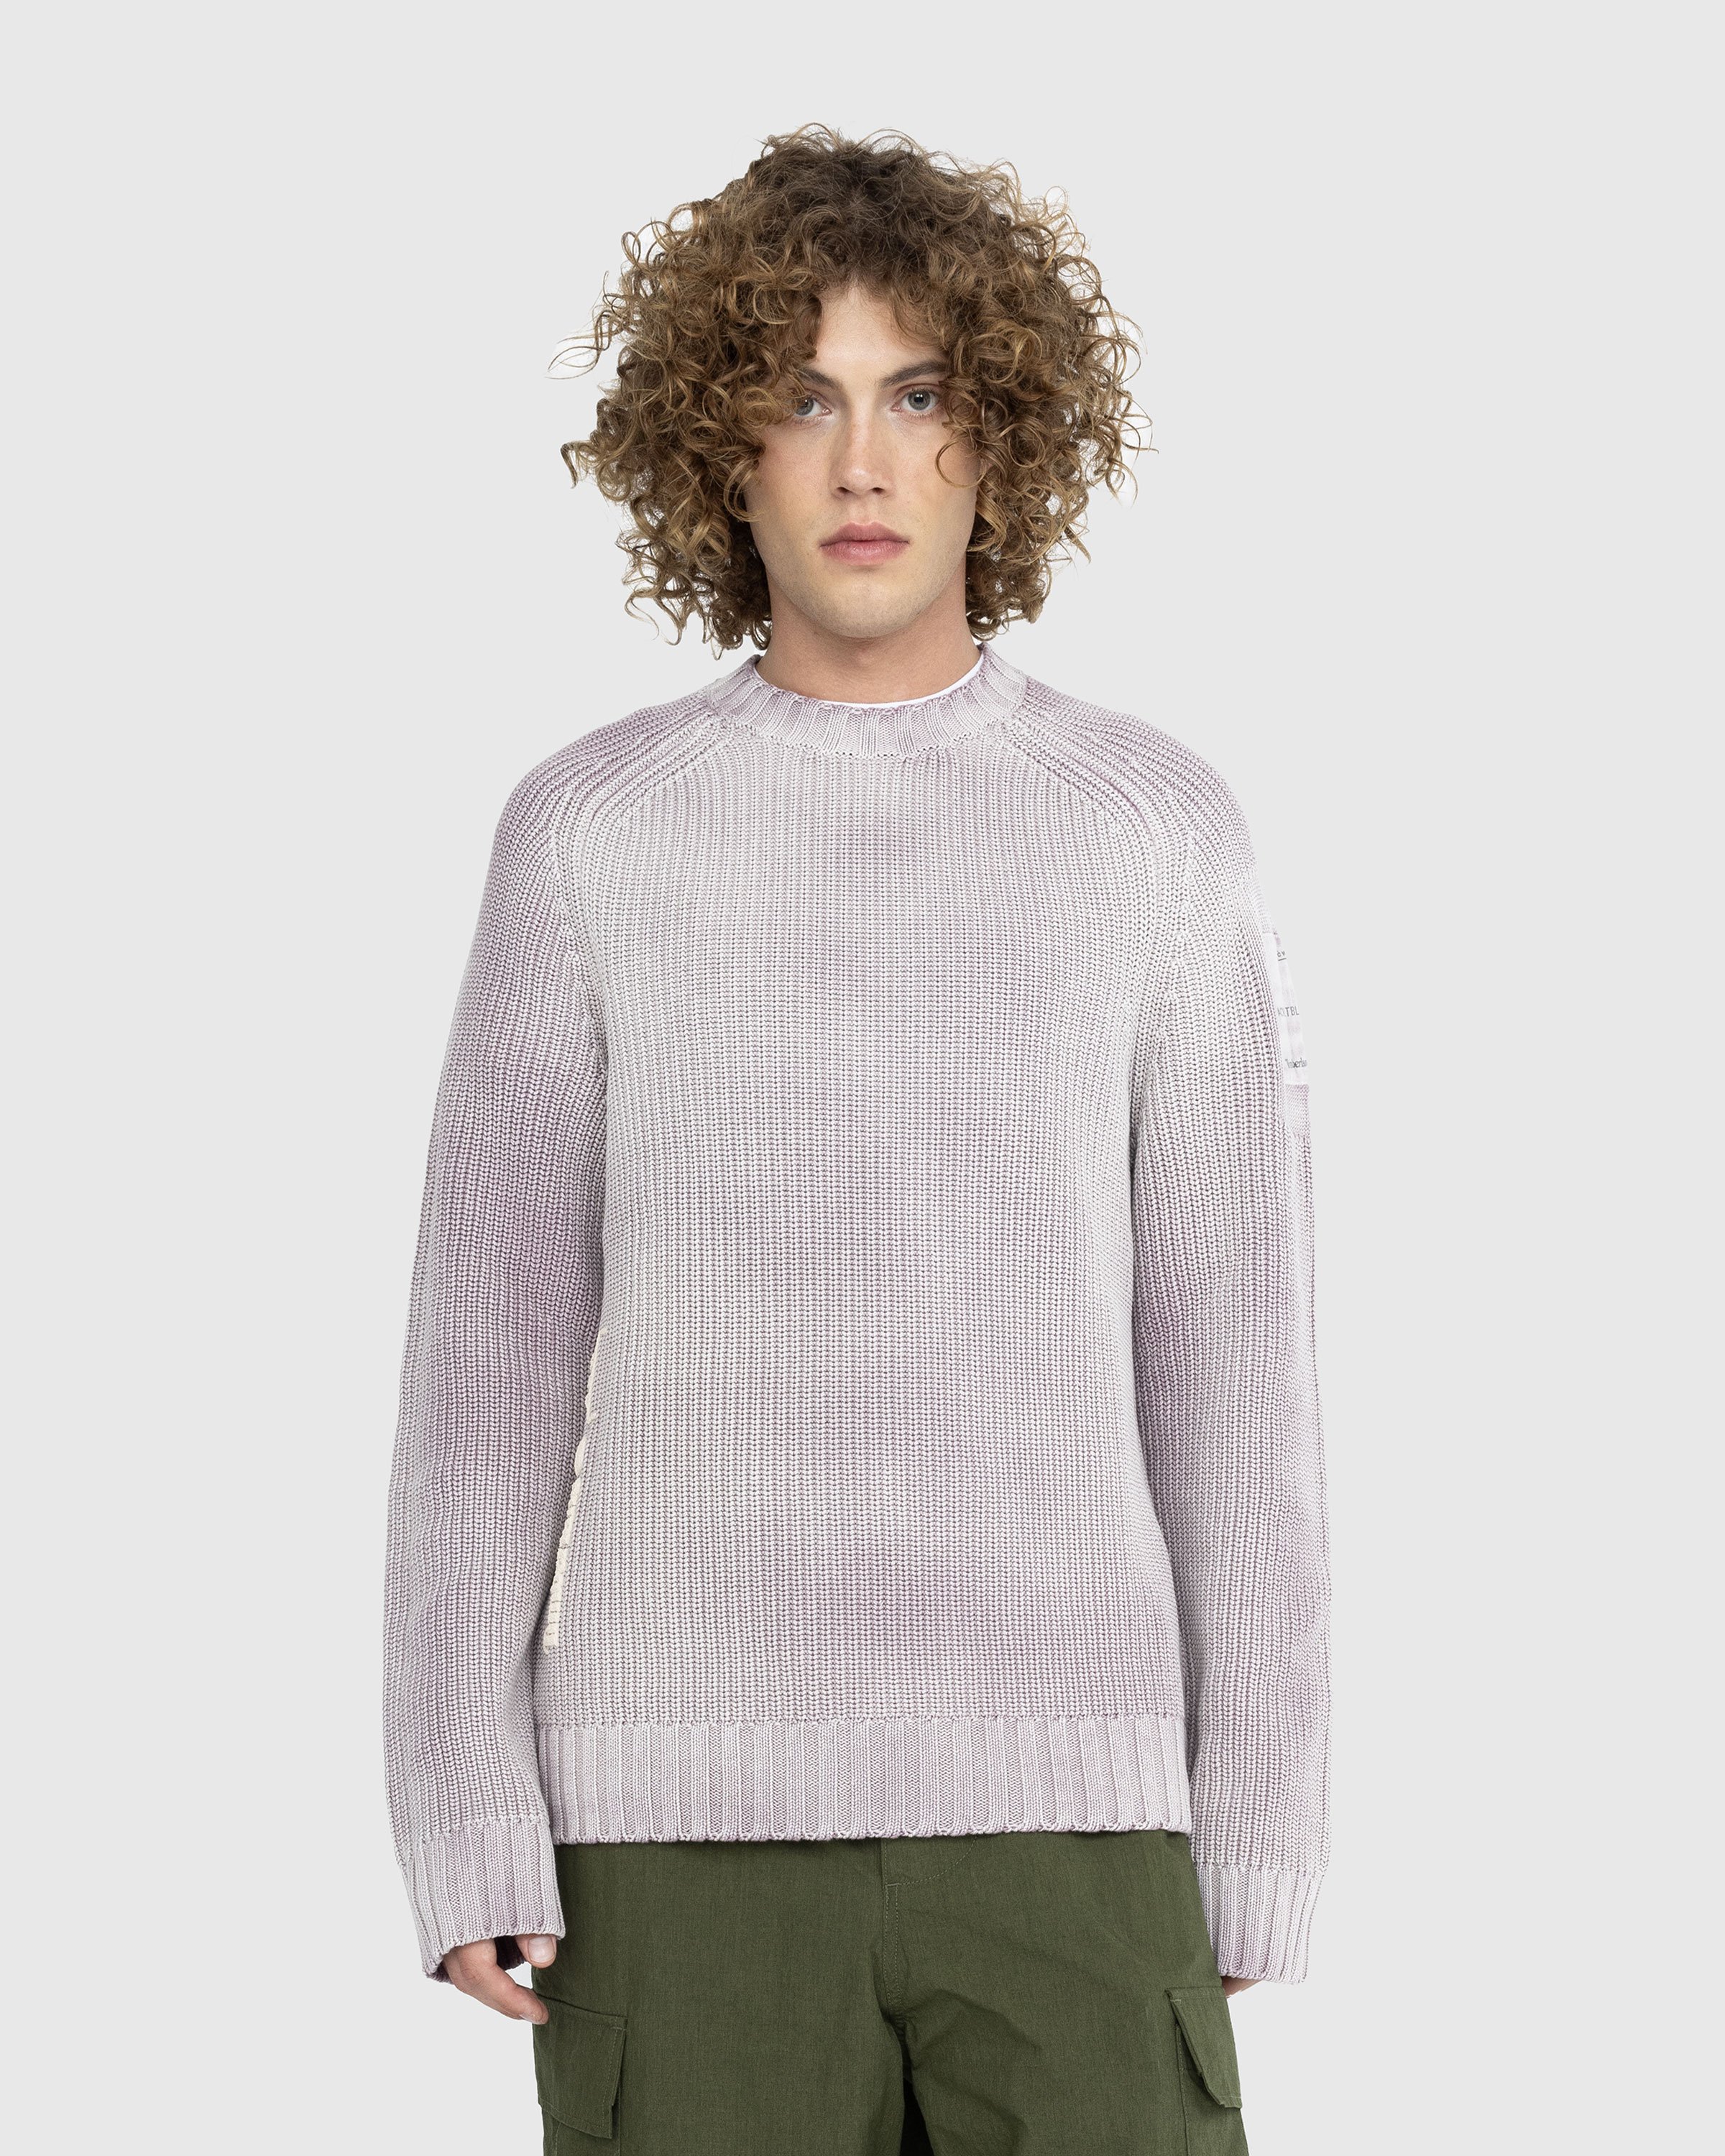 A-Cold-Wall* x Timberland - Fisherman Knit Moonscape - Clothing - Purple - Image 2